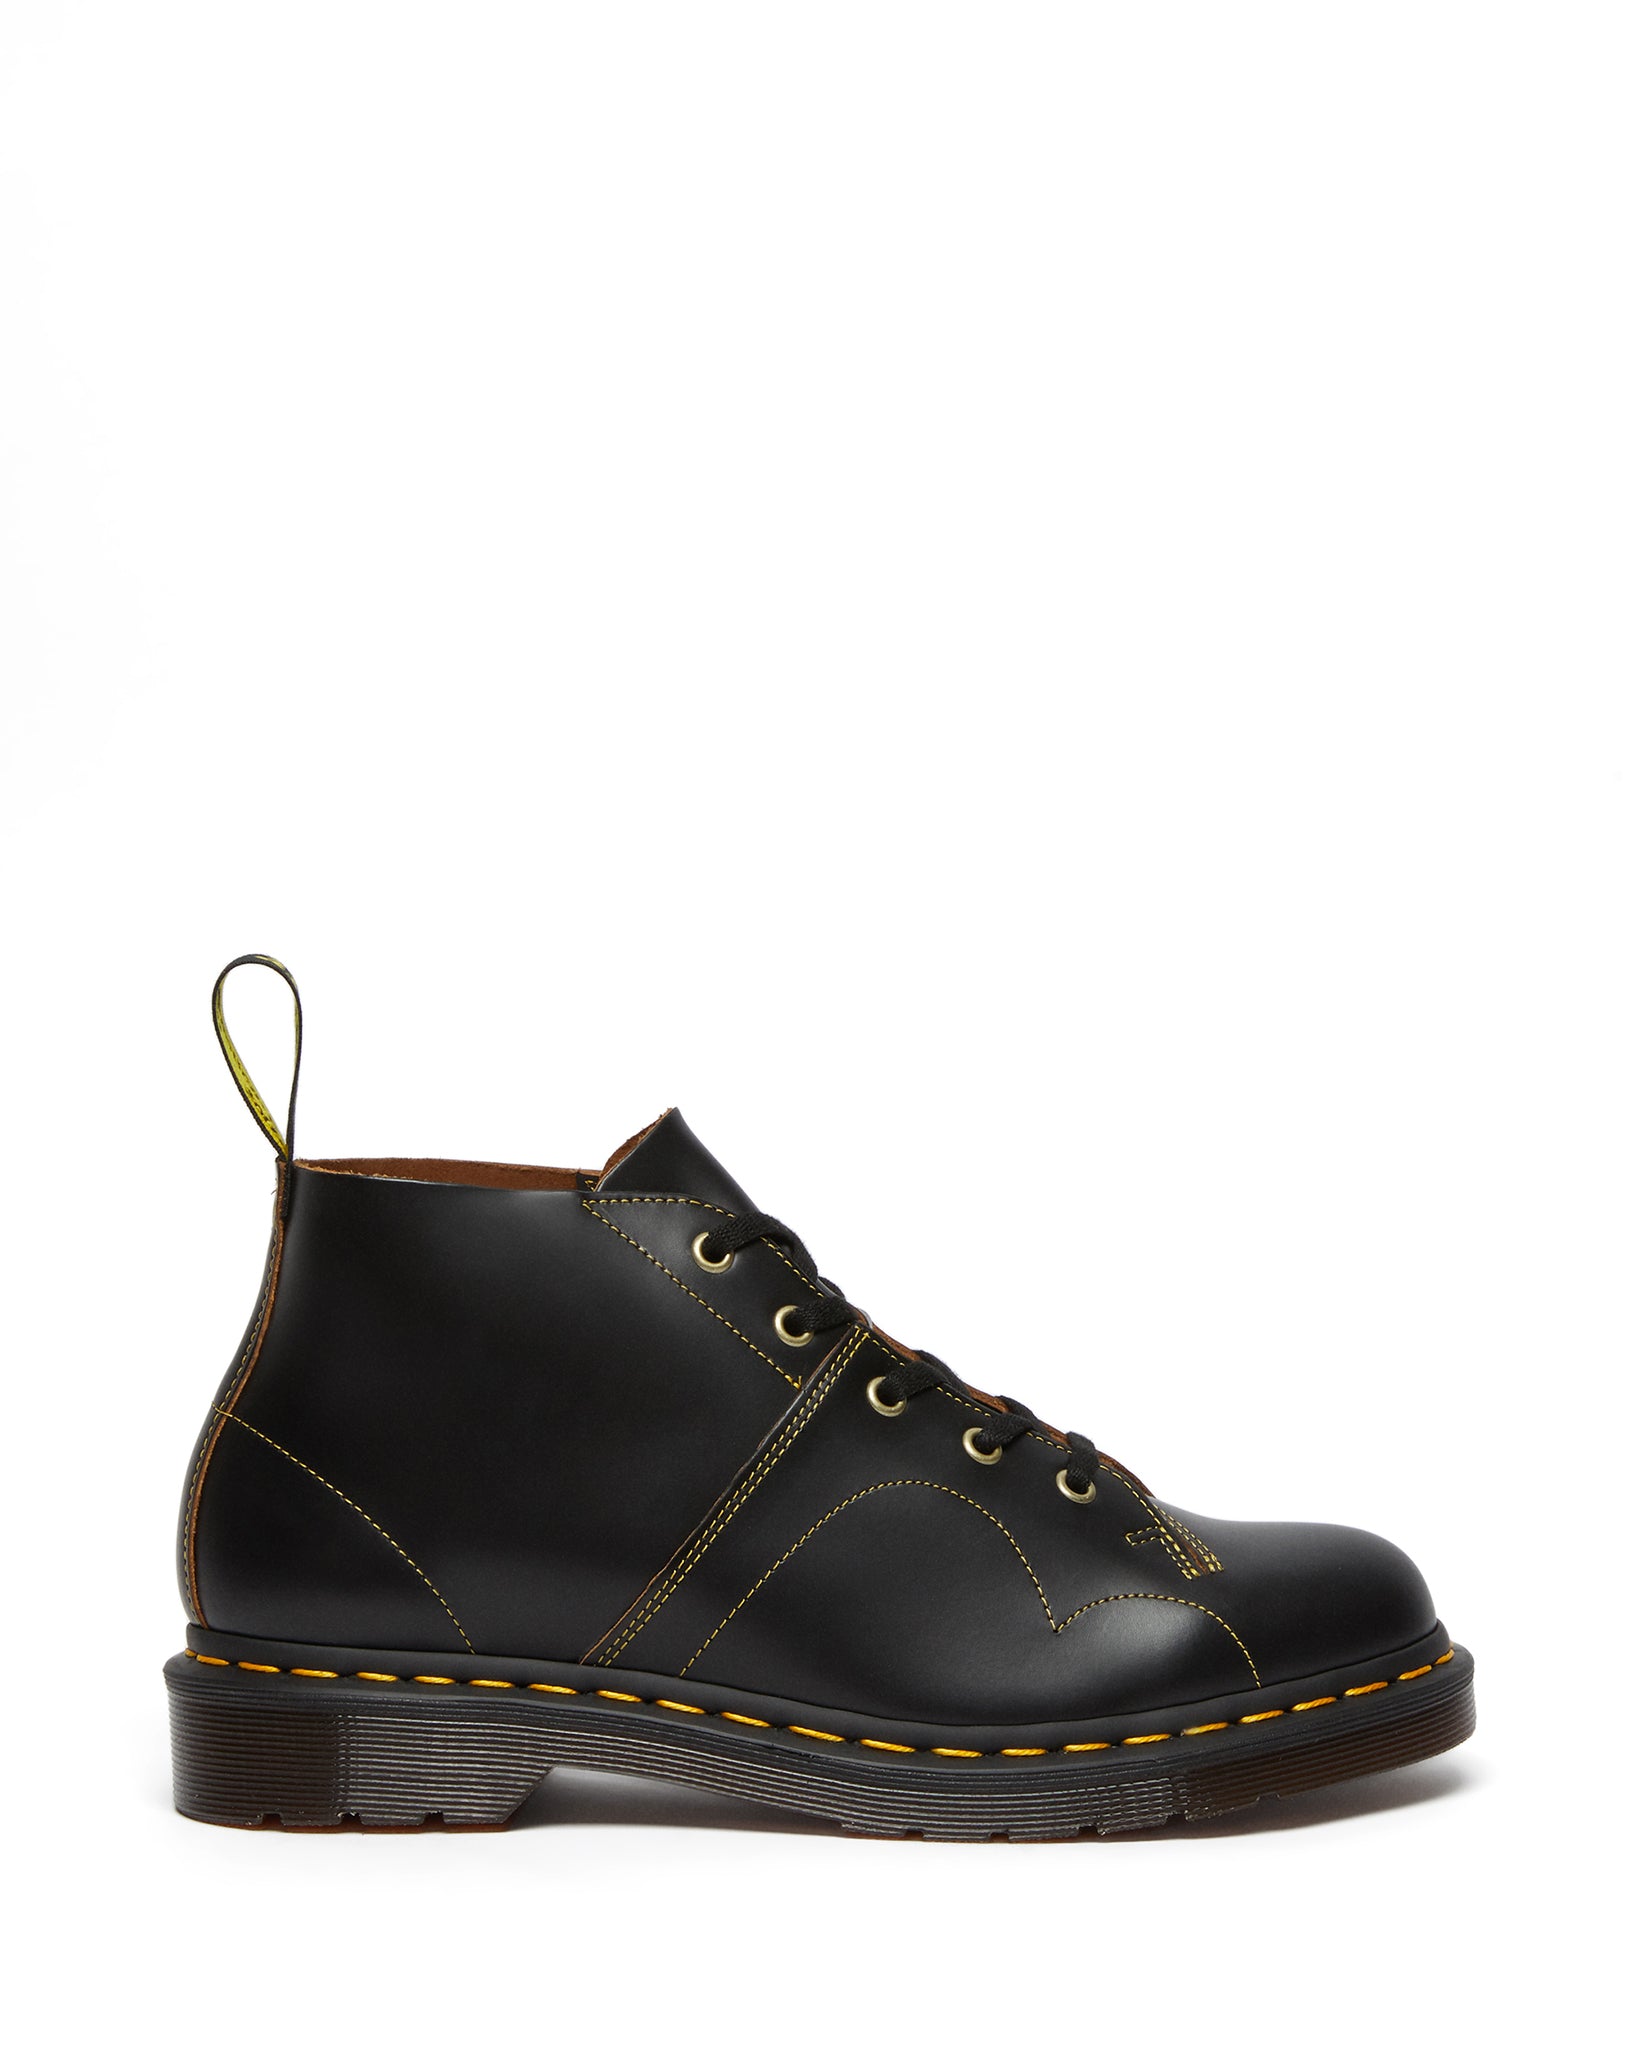 Archive Church Black Vintage Smooth Leather Monkey Boots